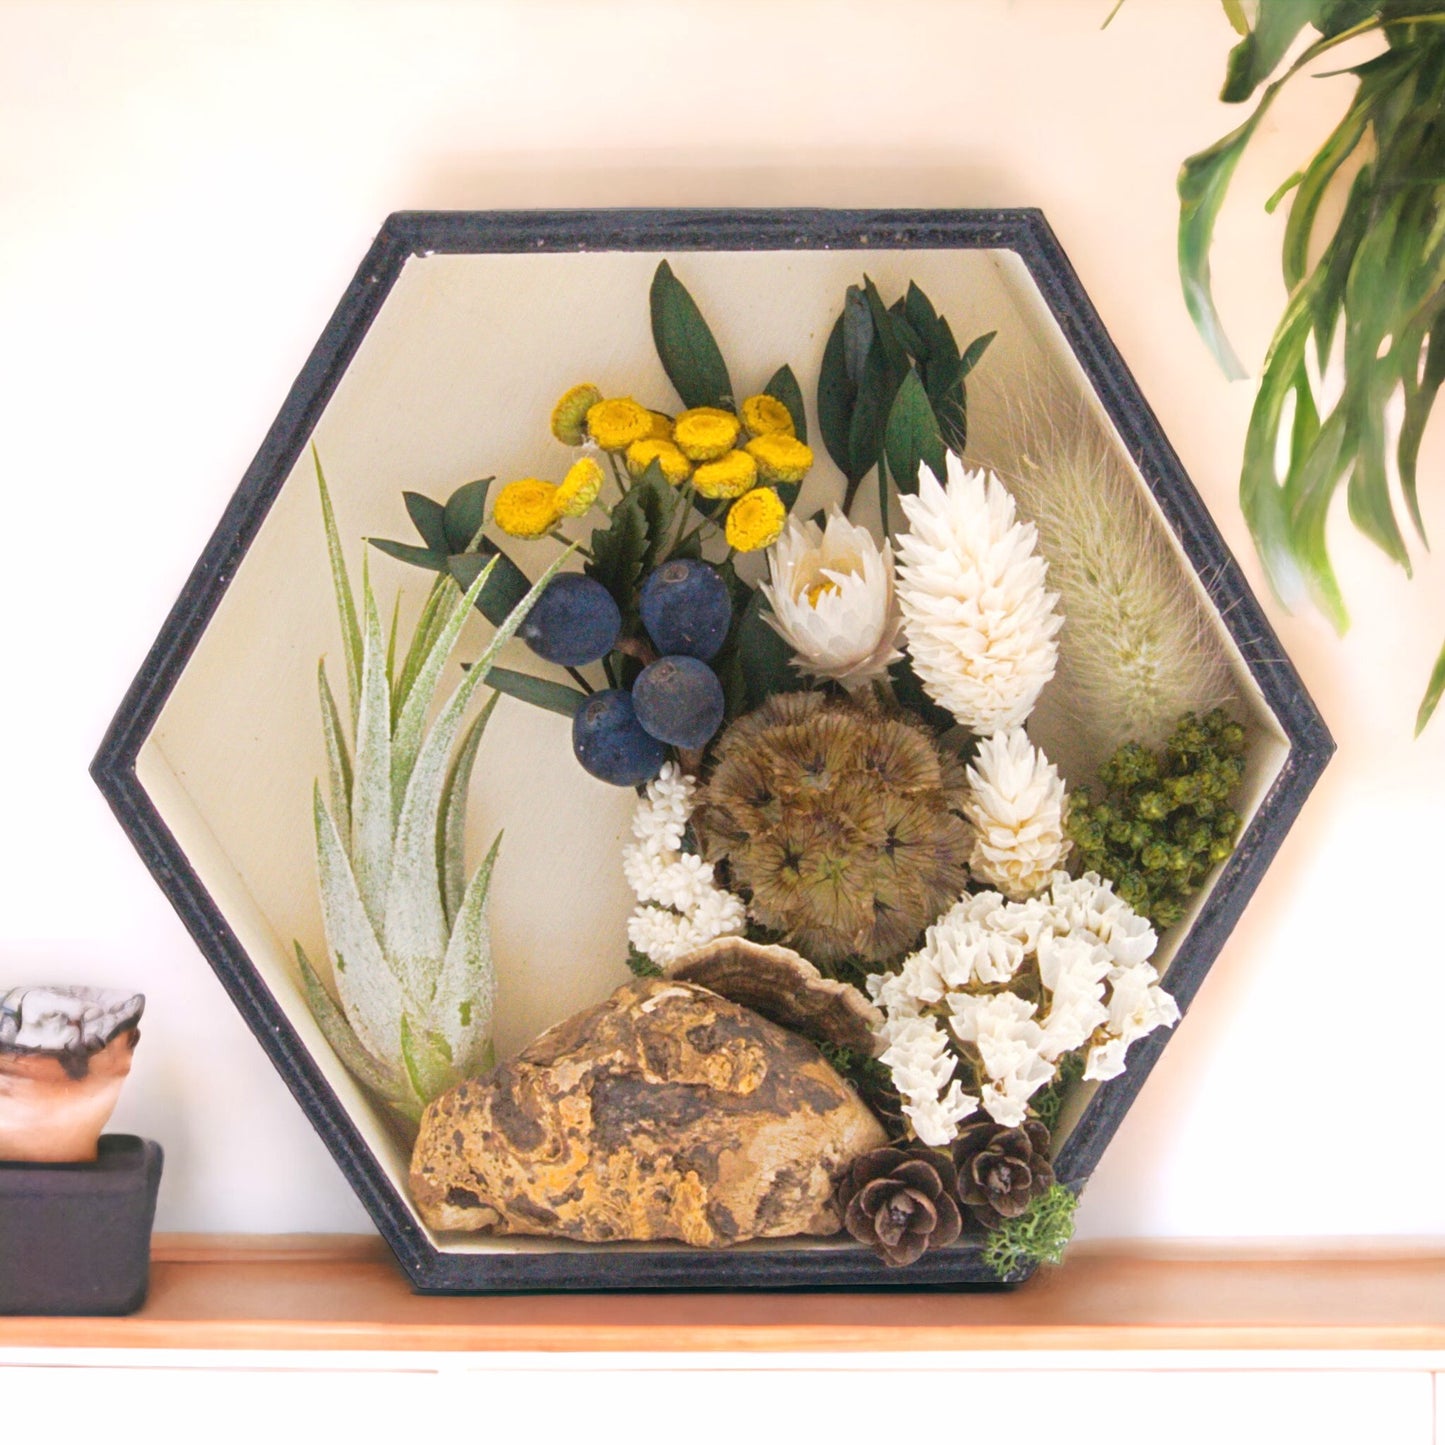 Hexagon wood box frame stained black with dried flowers, moss, wood, dried mushrooms, dried berries and an airplant